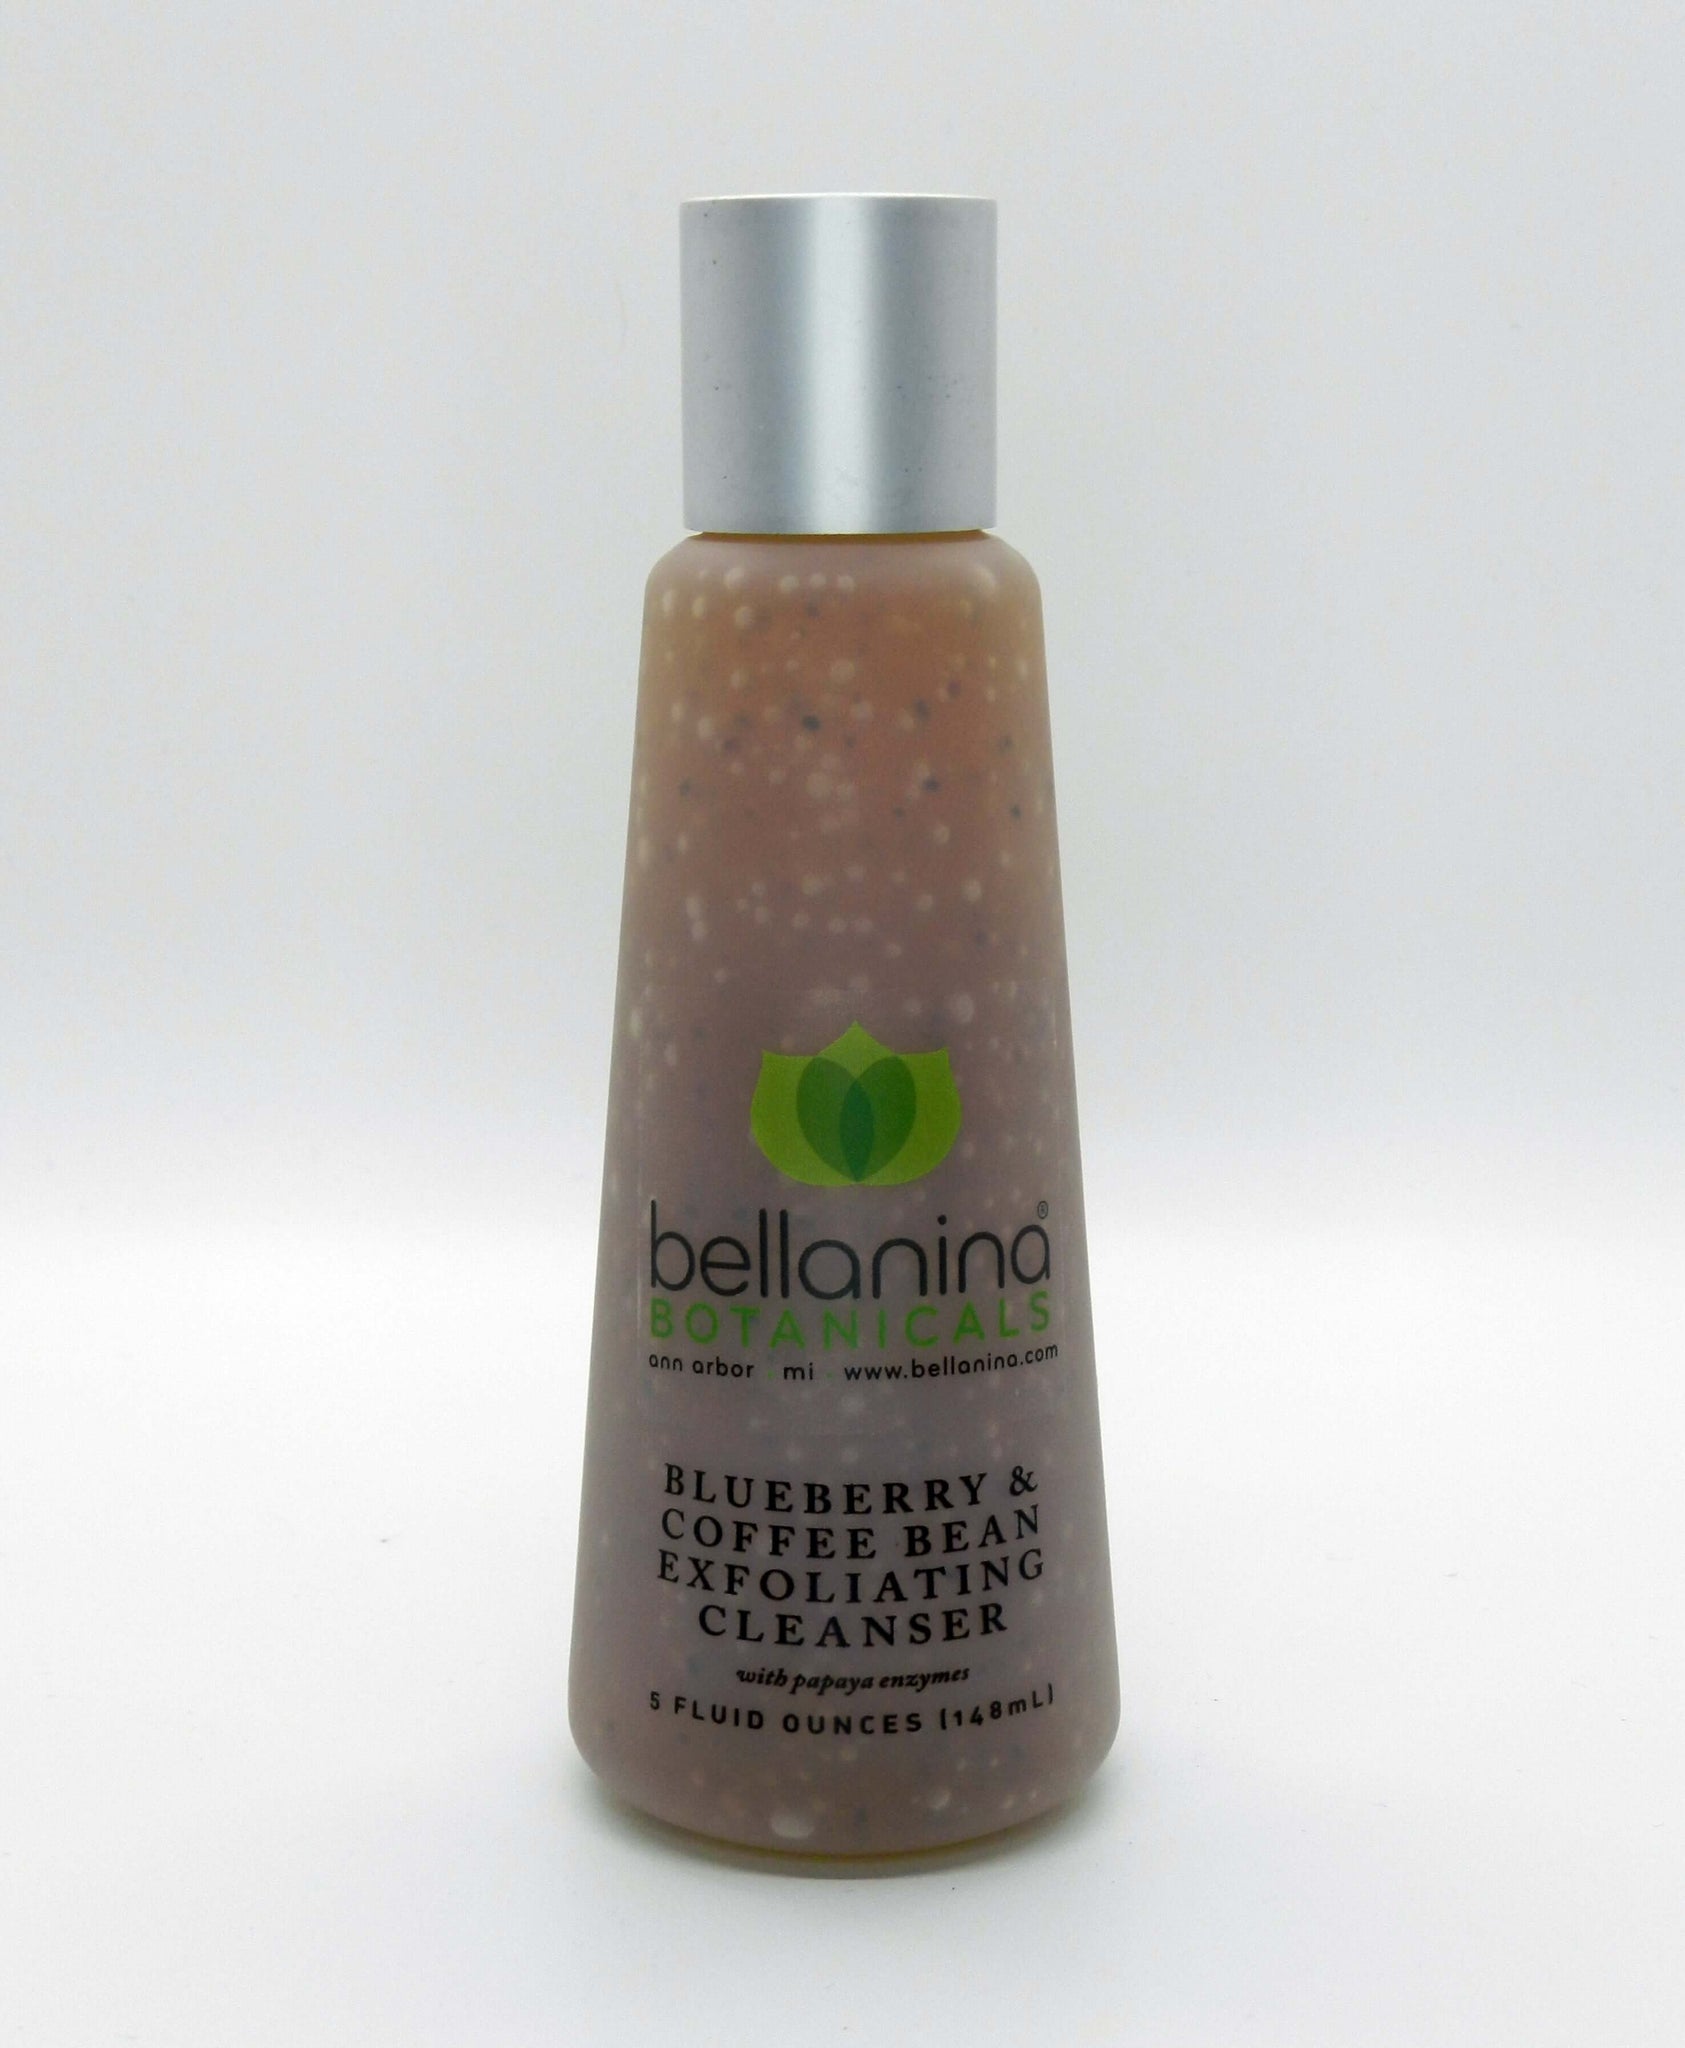 5 oz. bottle of Blueberry & Coffee Bean Exfoliating Cleanser